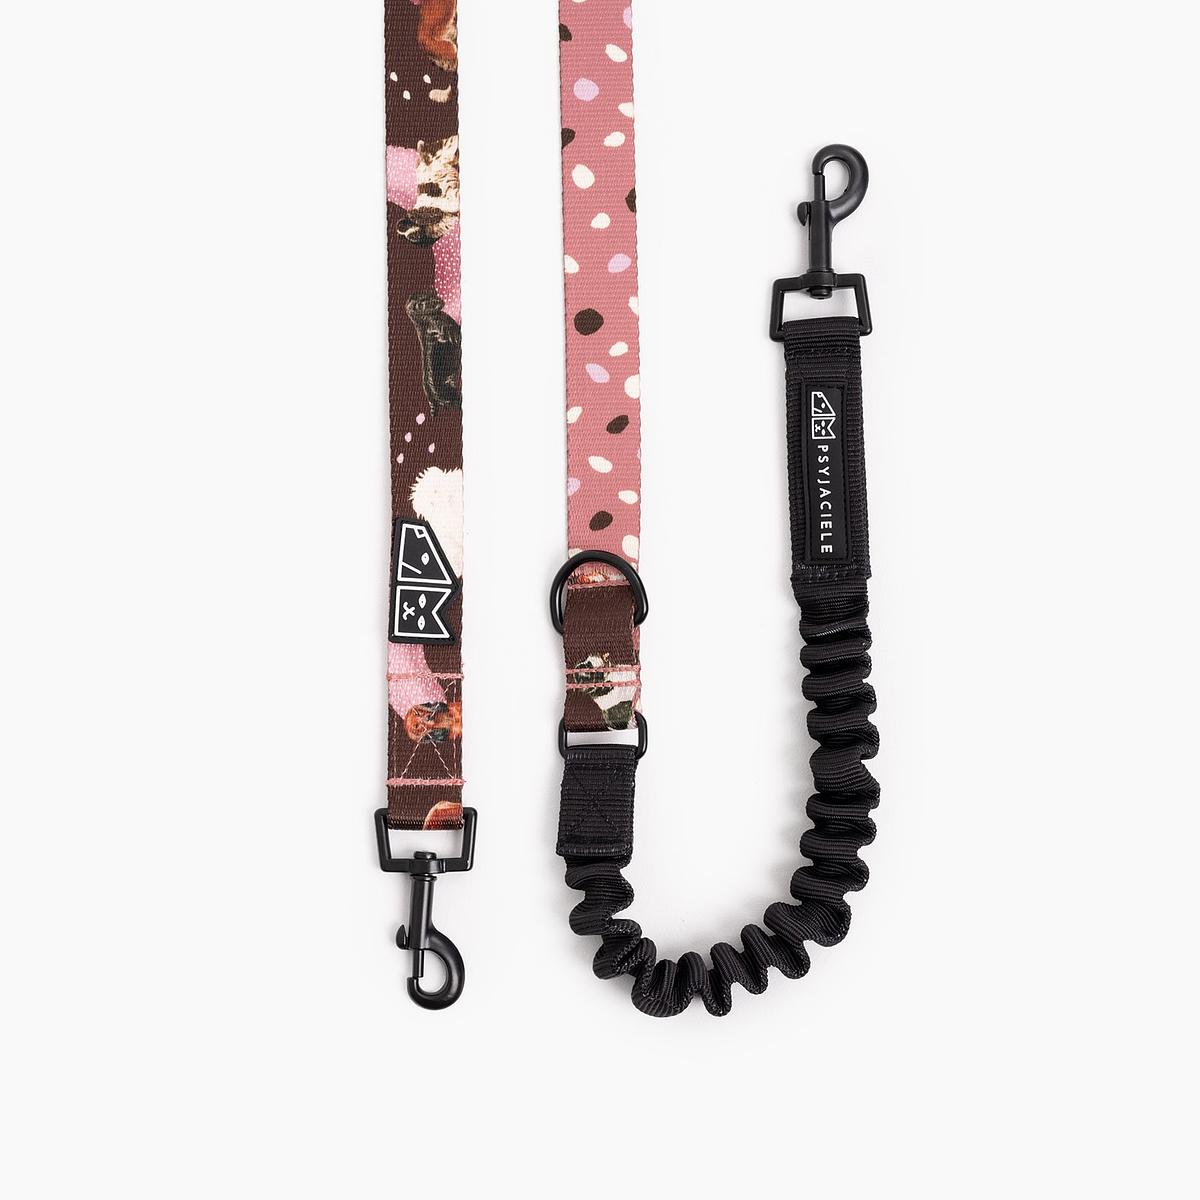 "Too sweet to handle" leash with a shock absorber